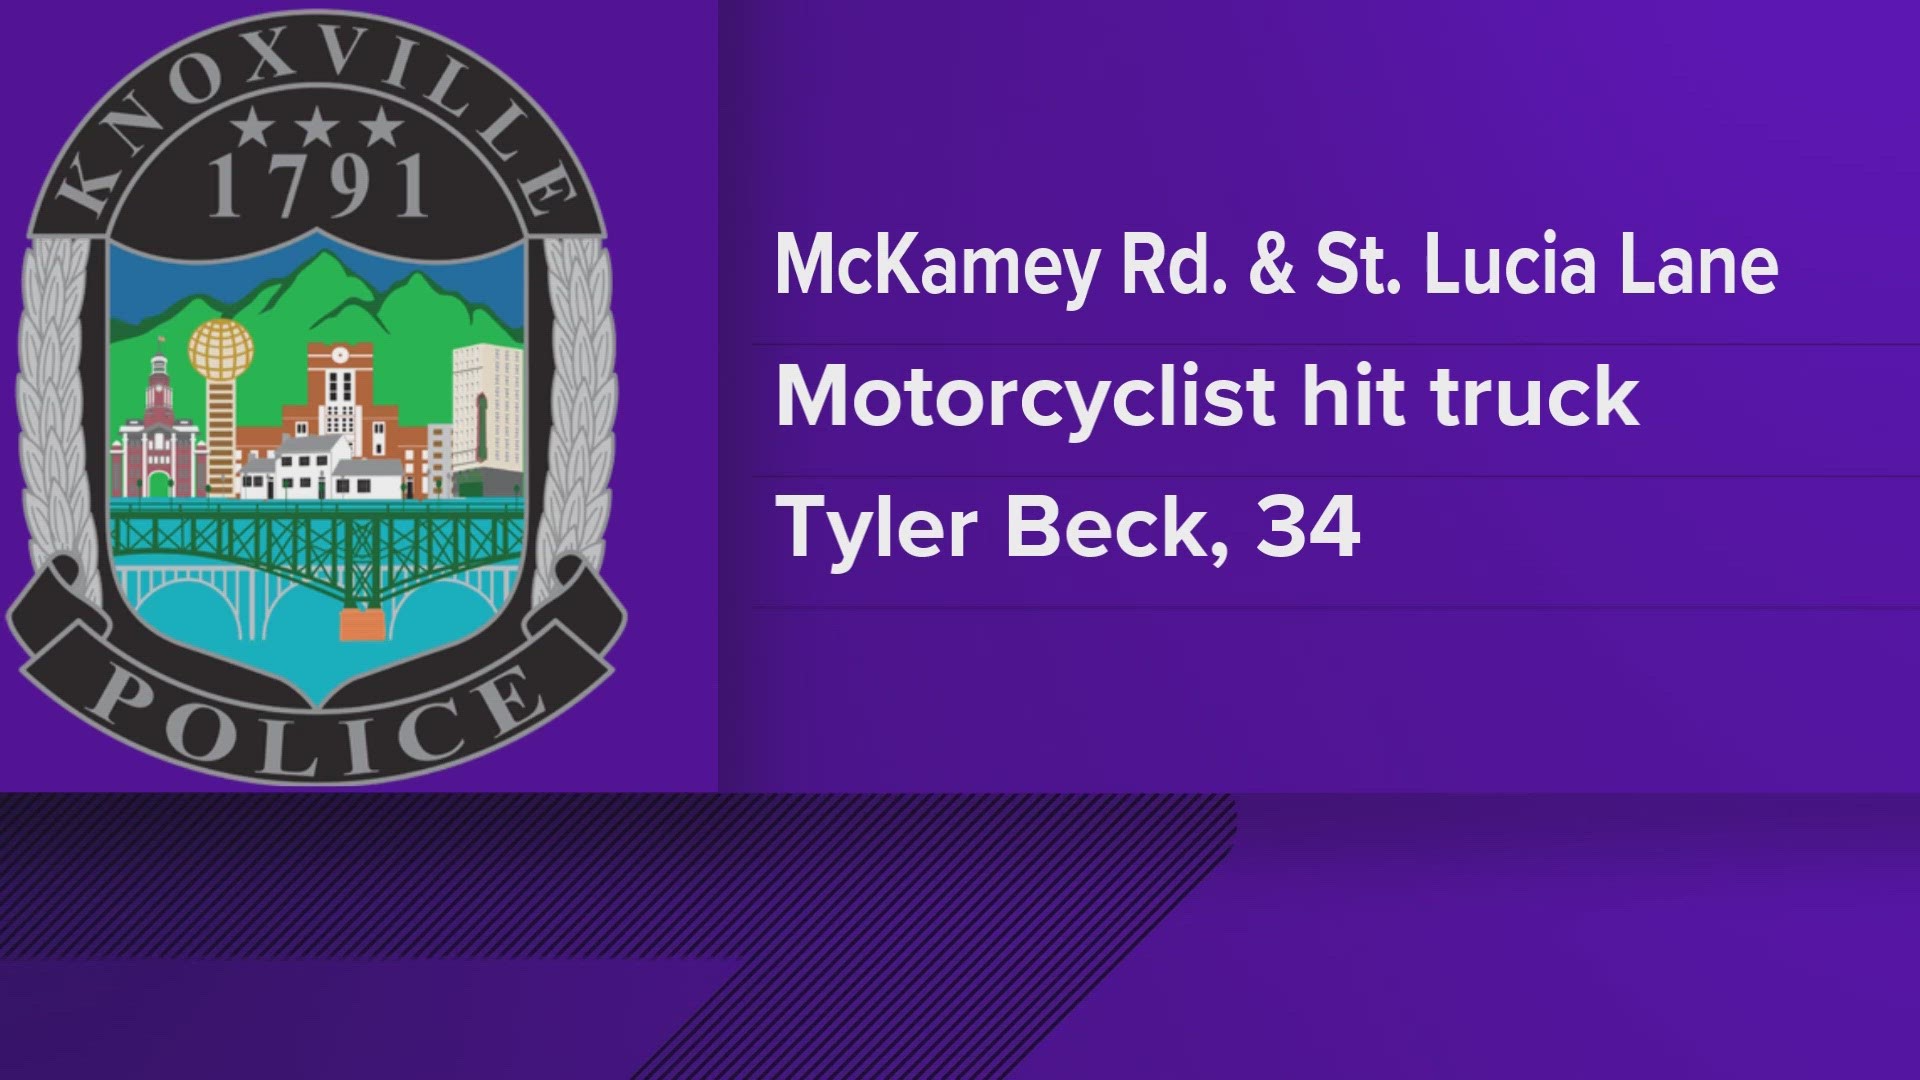 Knoxville Police said the motorcyclist was traveling east on McKamey Road when he struck the side of a large truck.